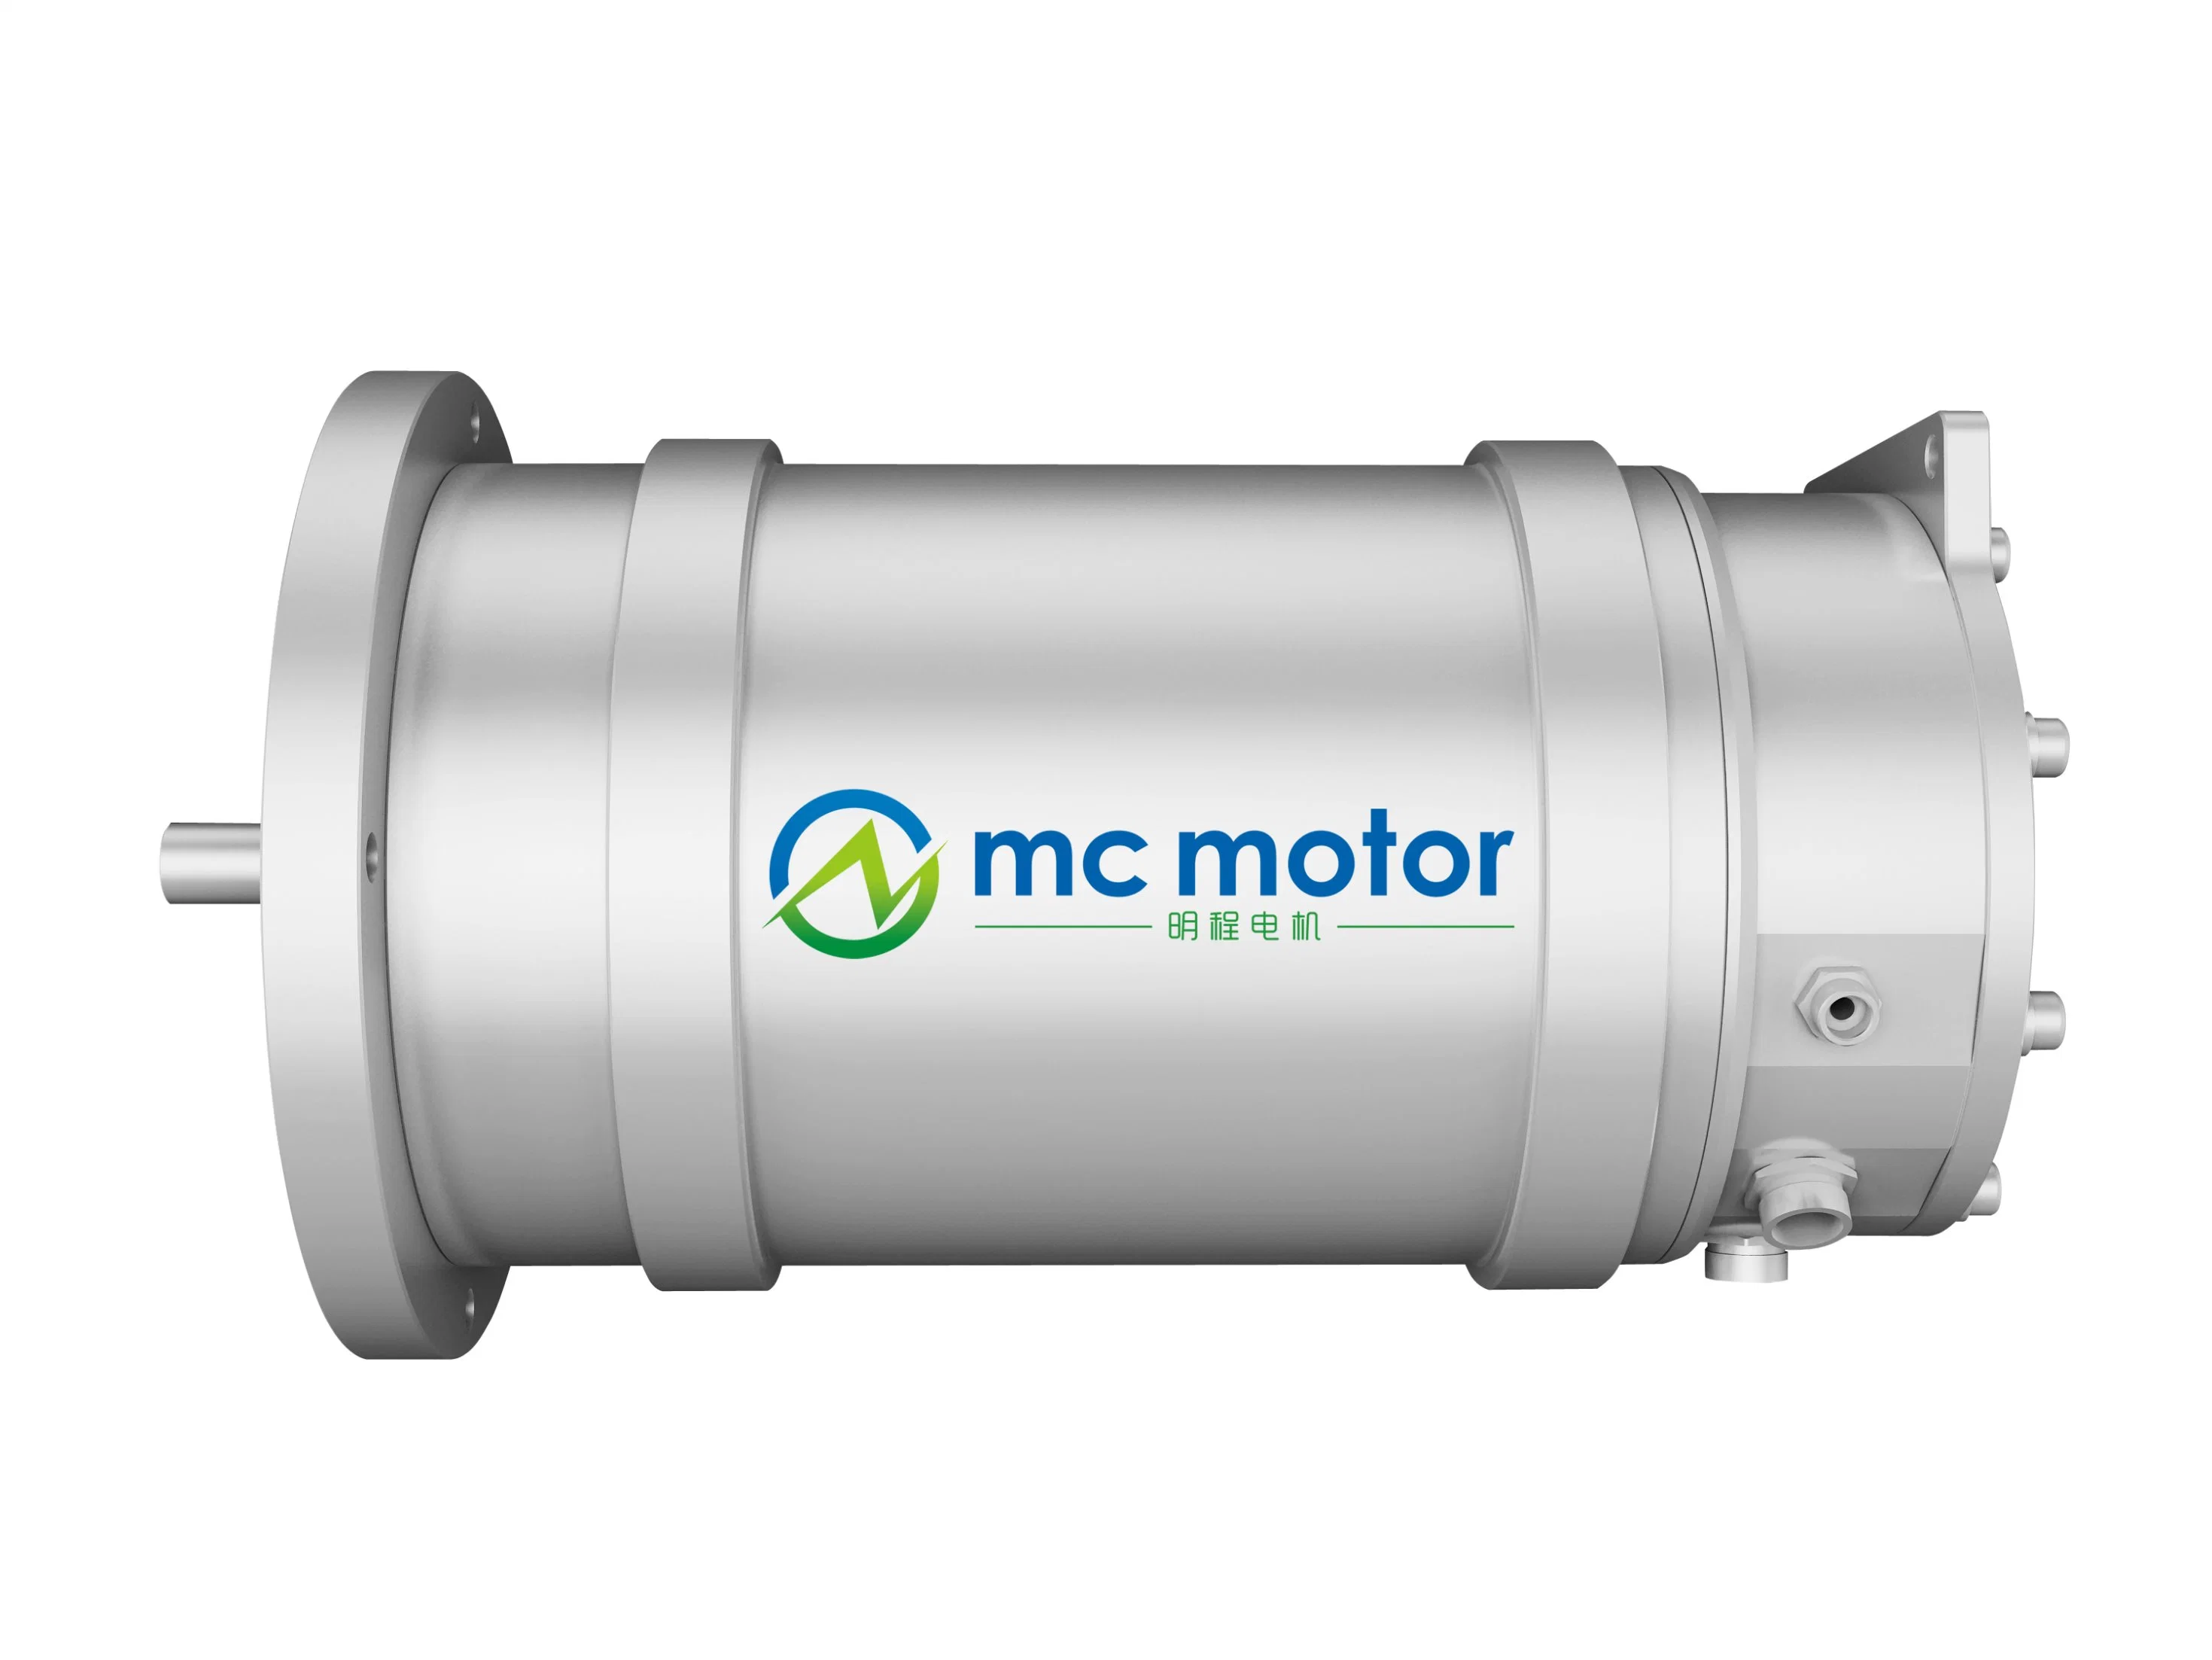 DC 10kw Industrial Electric Motor for New Vehicle High Speed 10000-16000rpm Customized